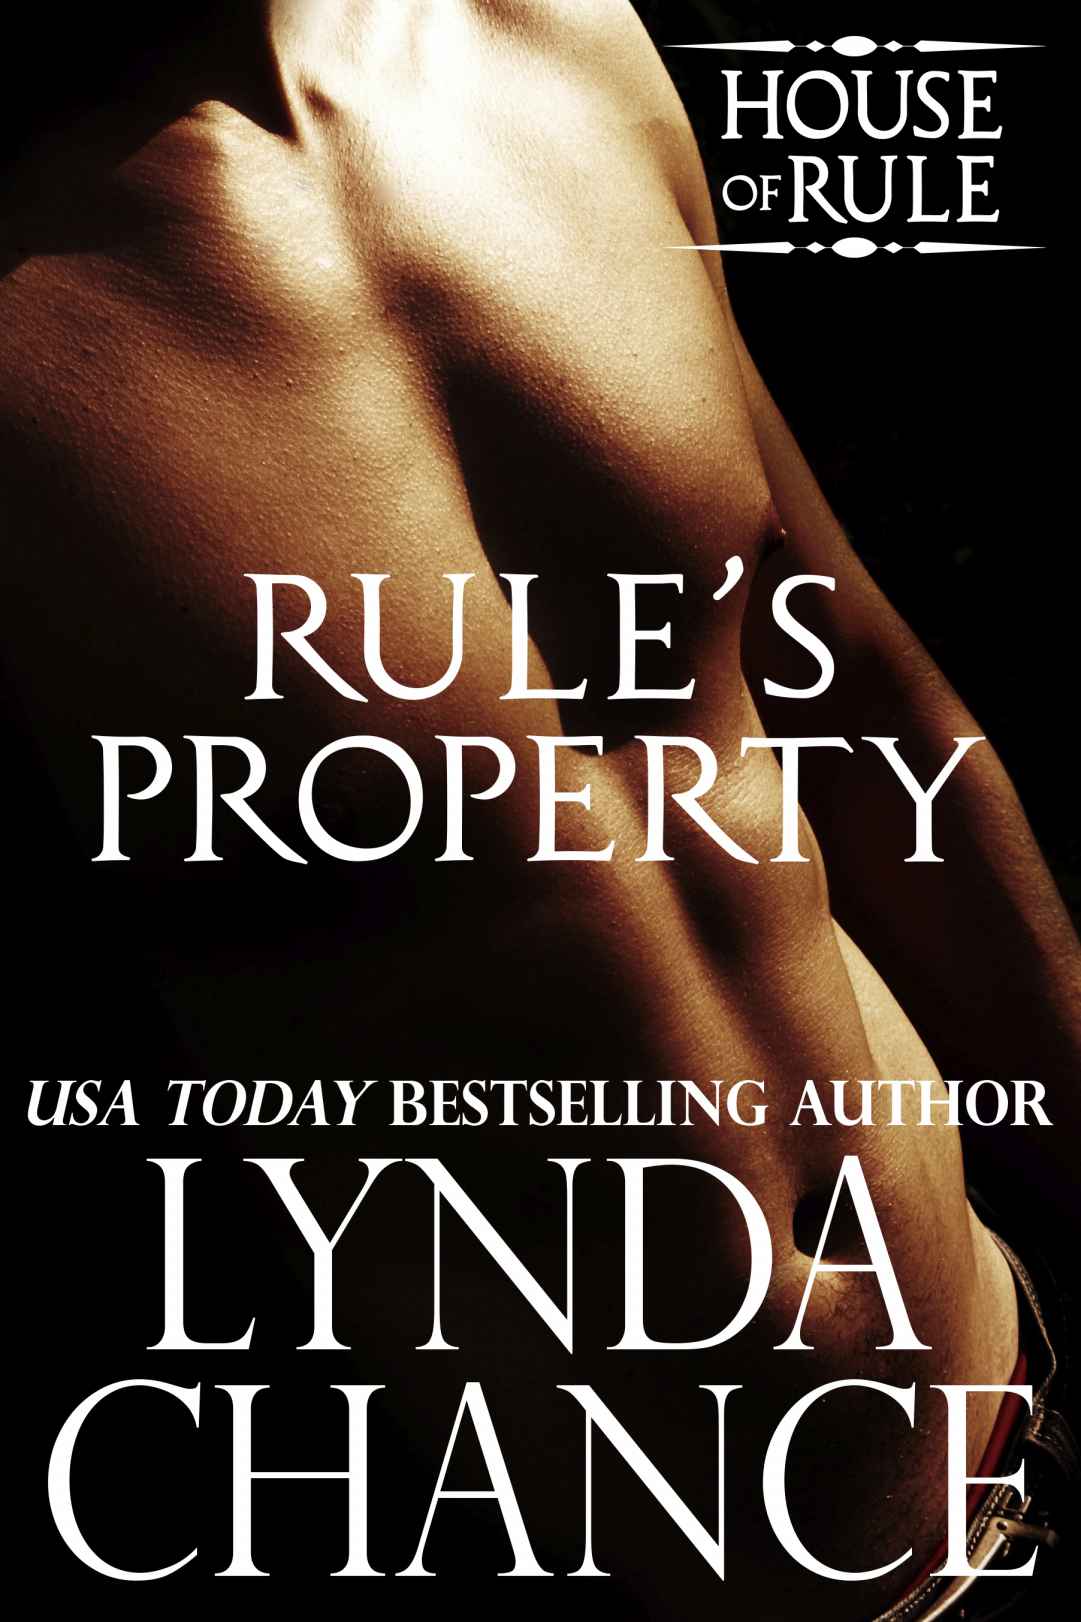 Rule's Property (The House of Rule Book 2) by Lynda Chance